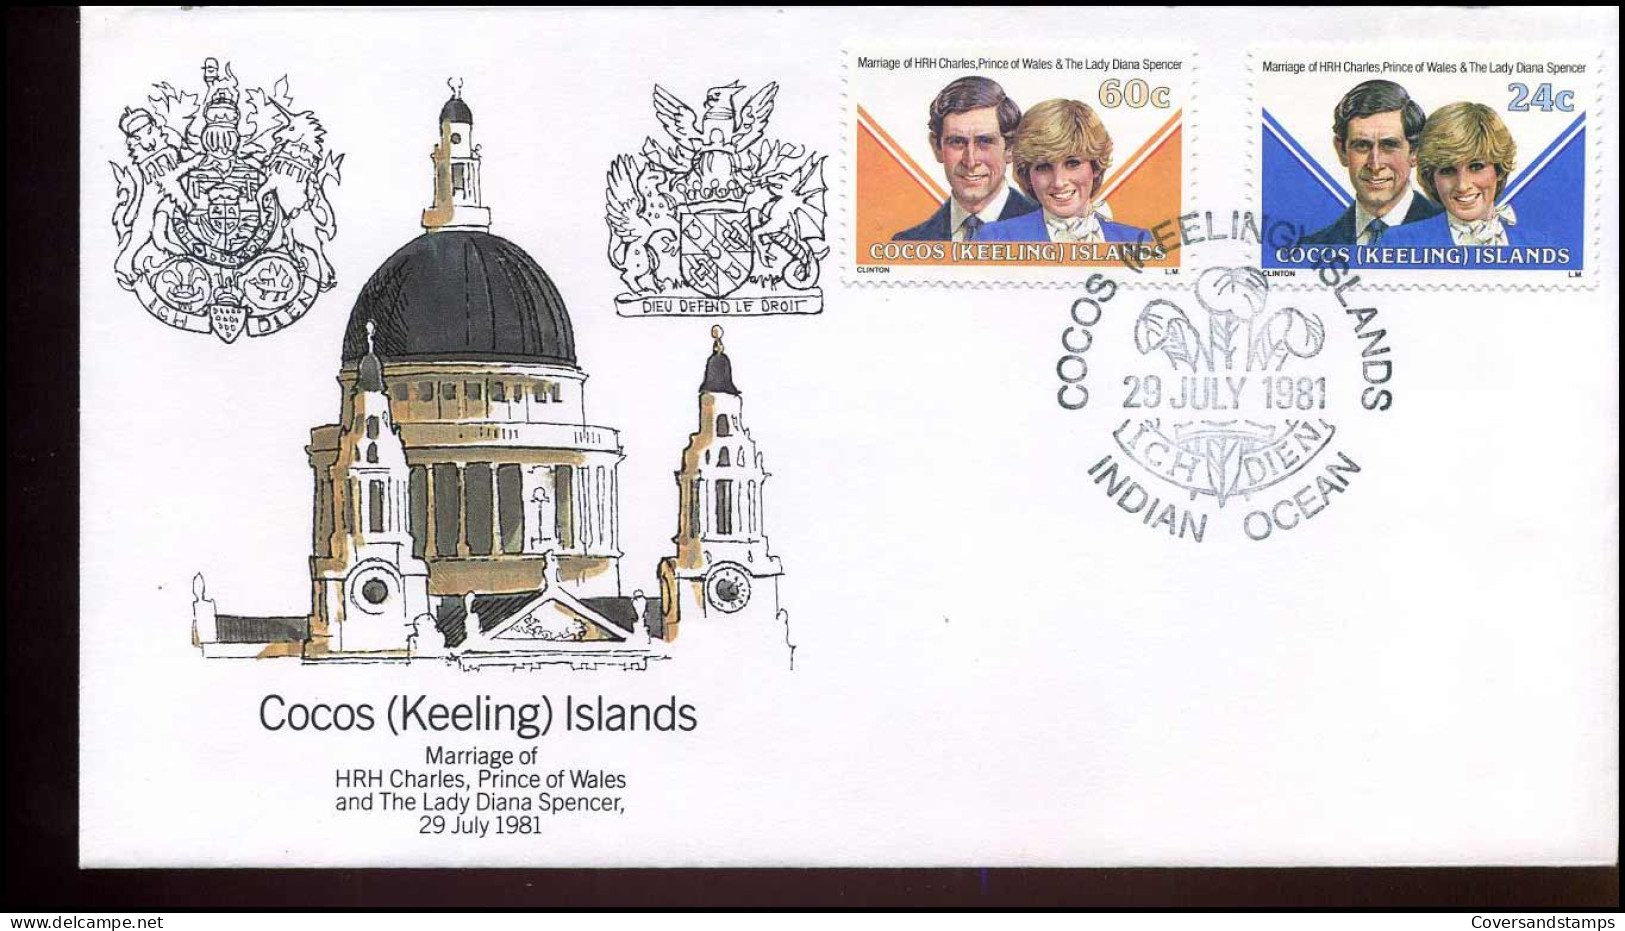 FDC - Marriage Of HRH Charles, Prince Of Wales And The Lady Diana Spencer - Kokosinseln (Keeling Islands)